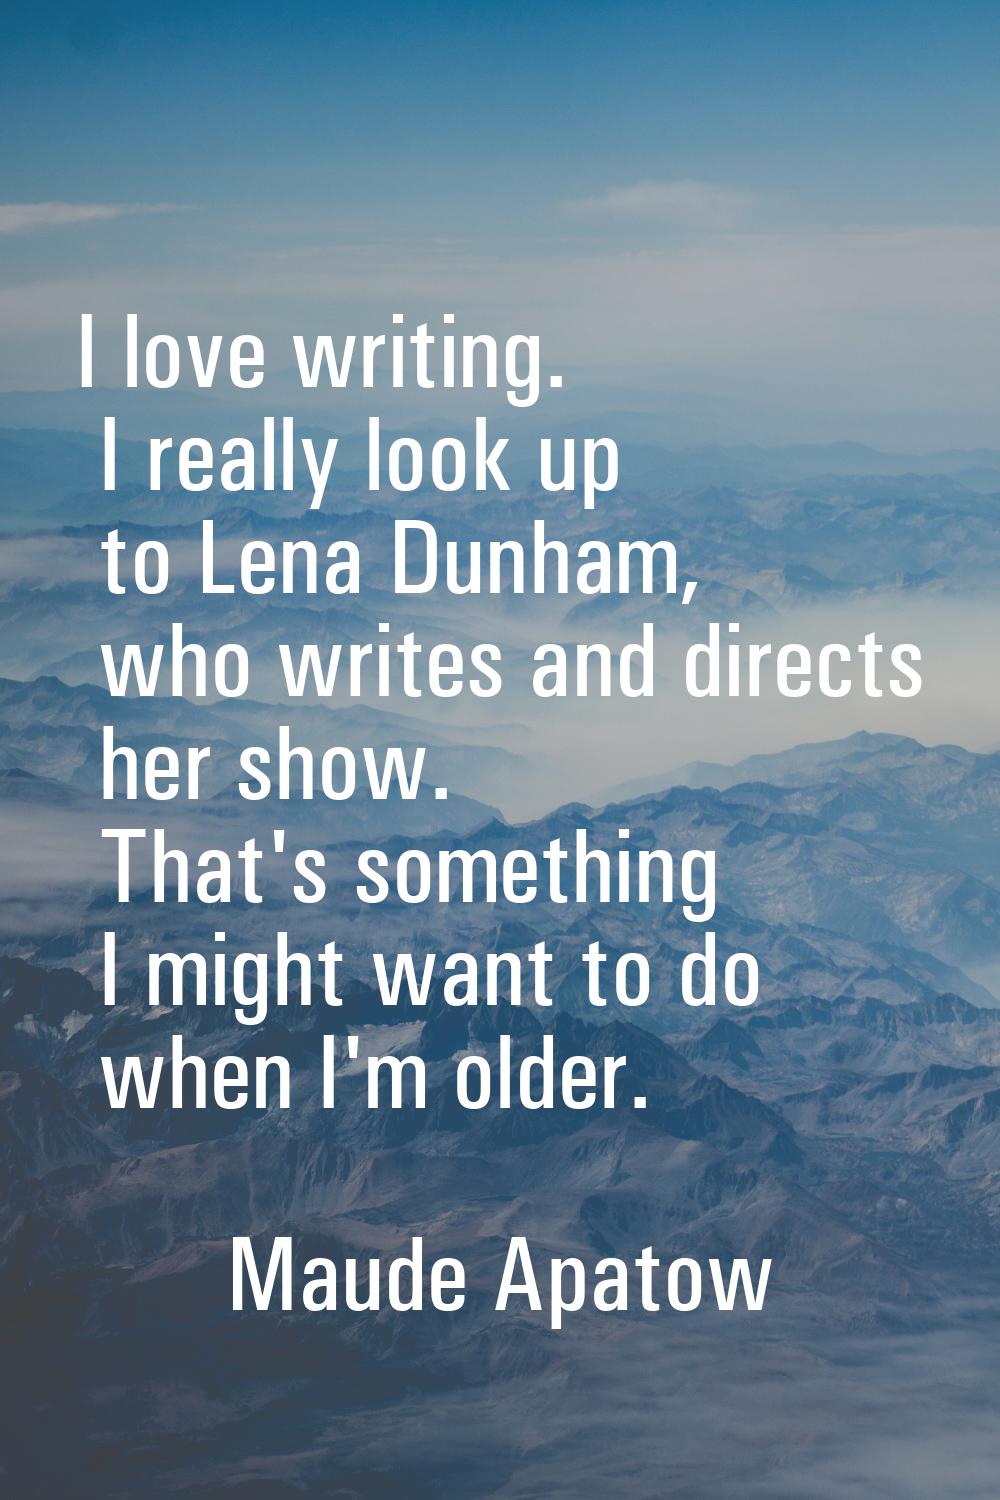 I love writing. I really look up to Lena Dunham, who writes and directs her show. That's something 